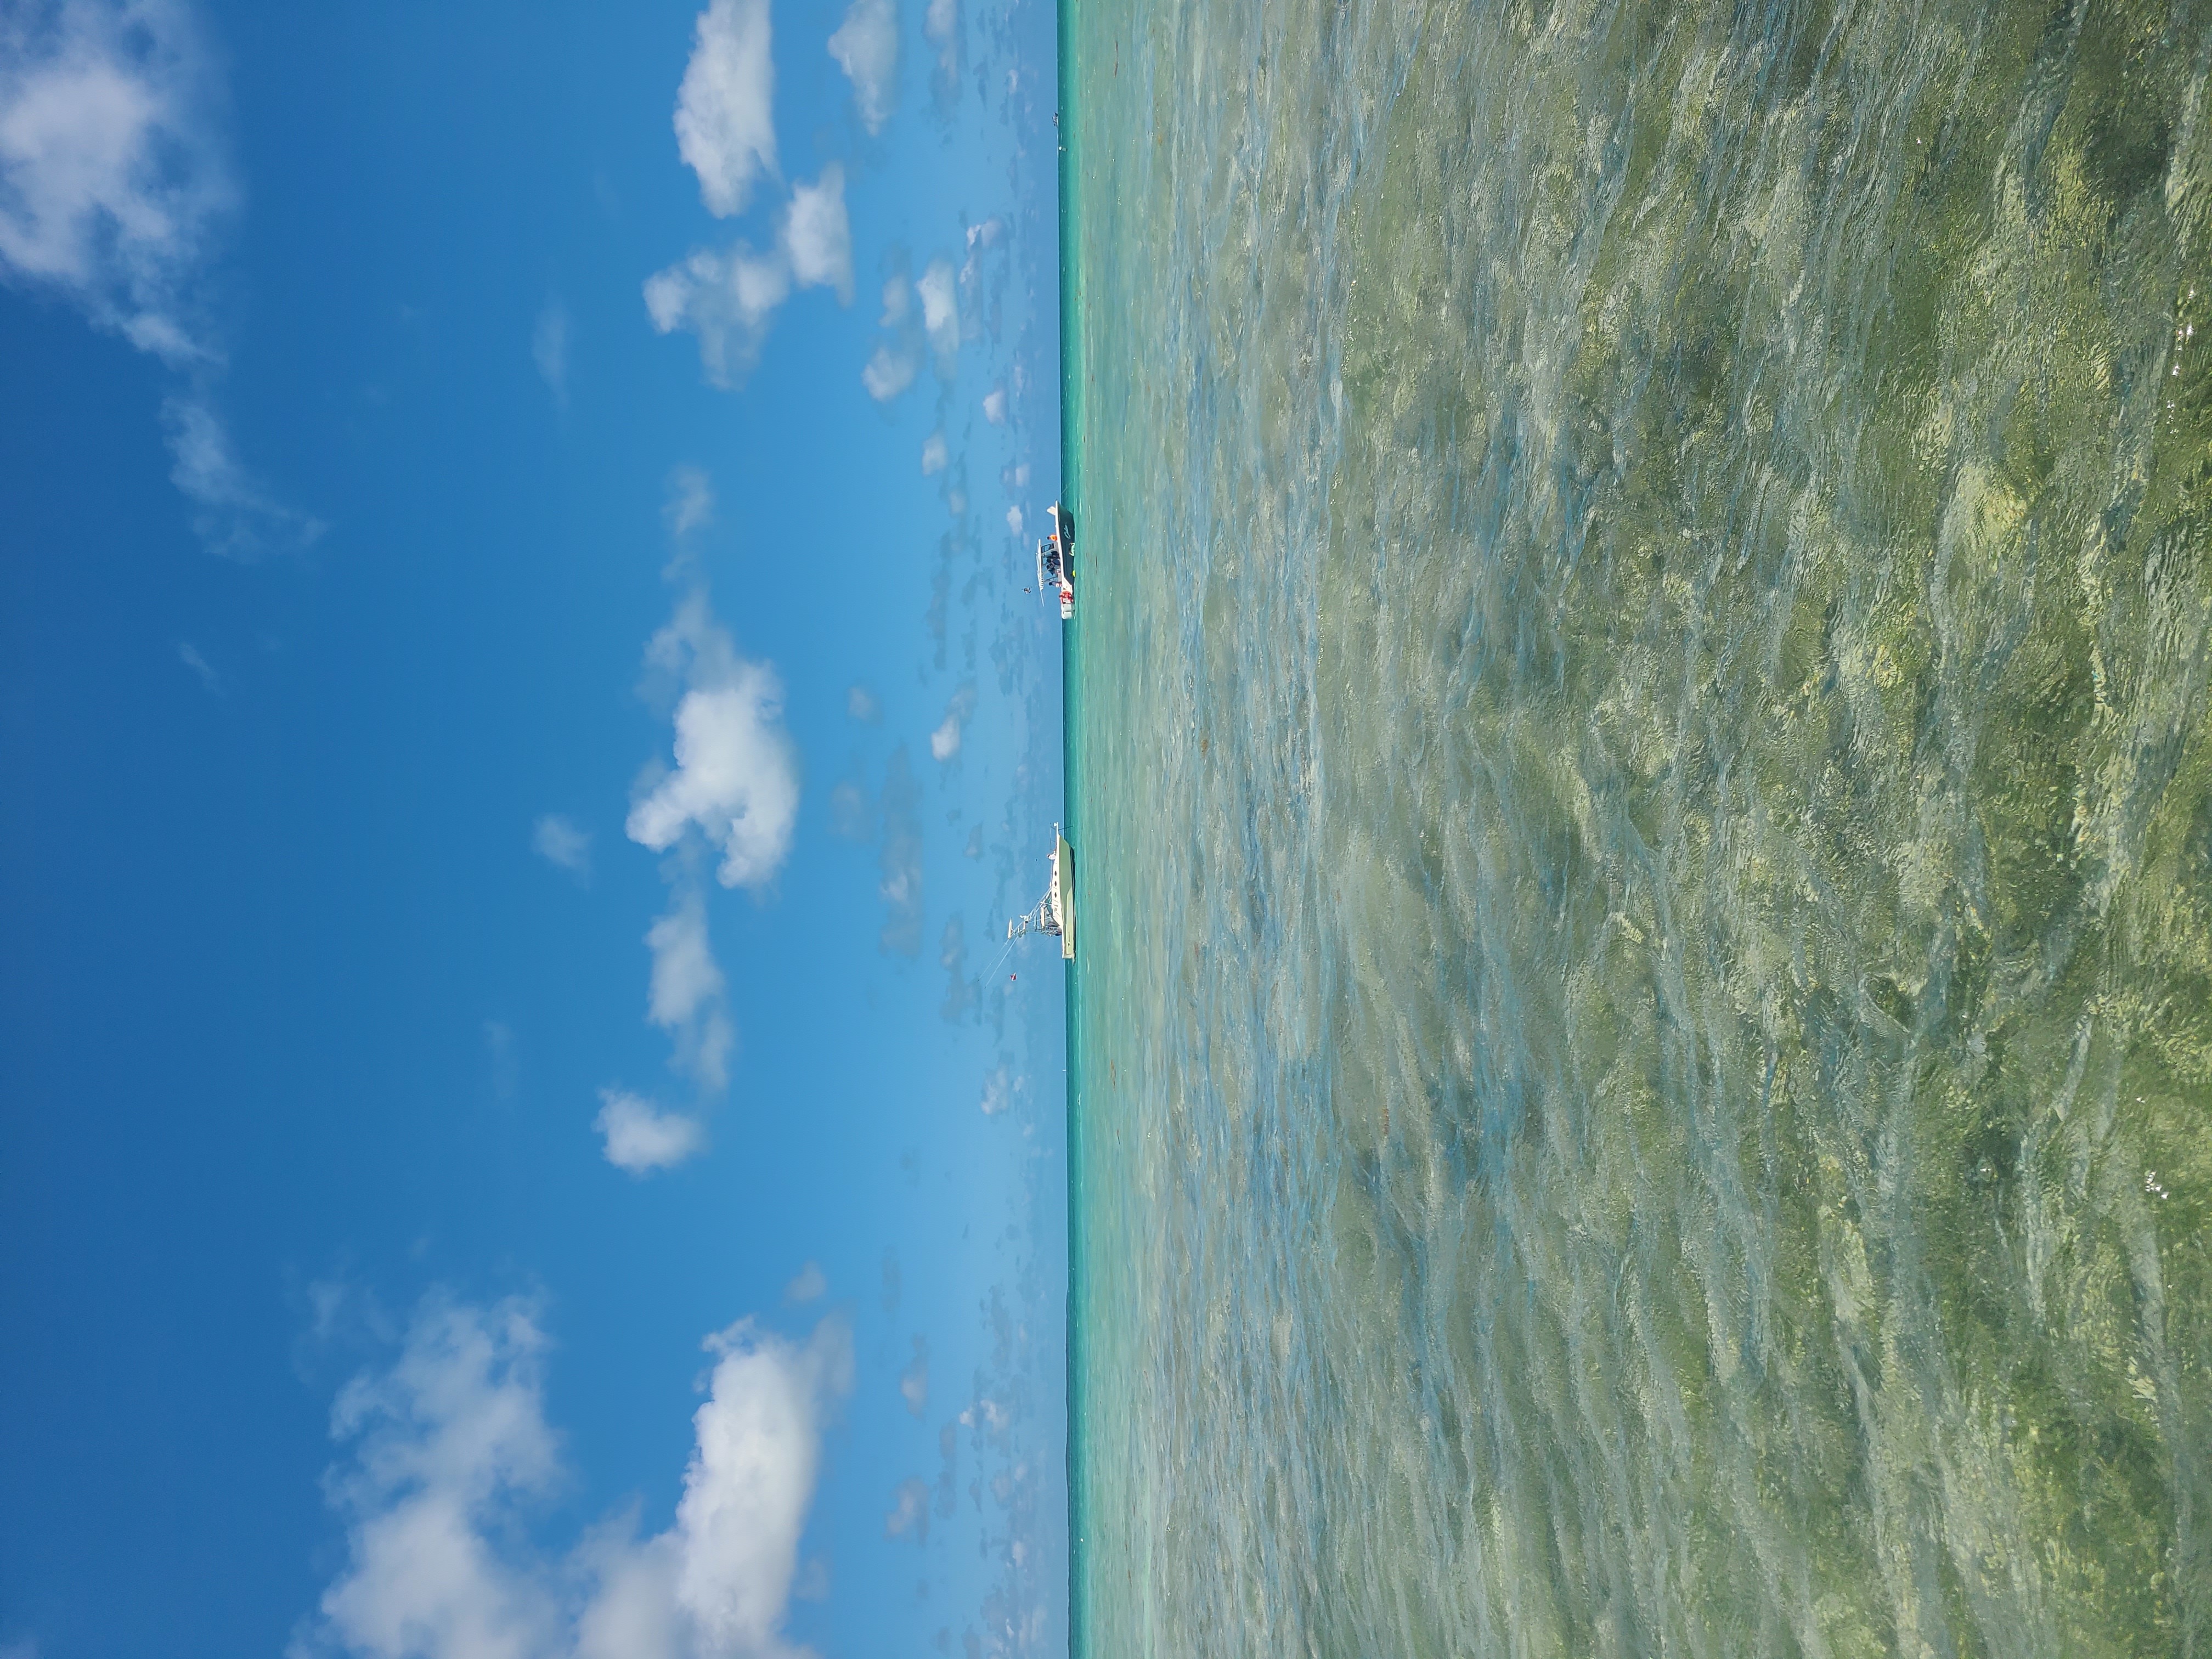 The picture shows the Florida Keys ocean on a sunny day, light teal colored water with bright blue skies and white clouds casting shade over the sea